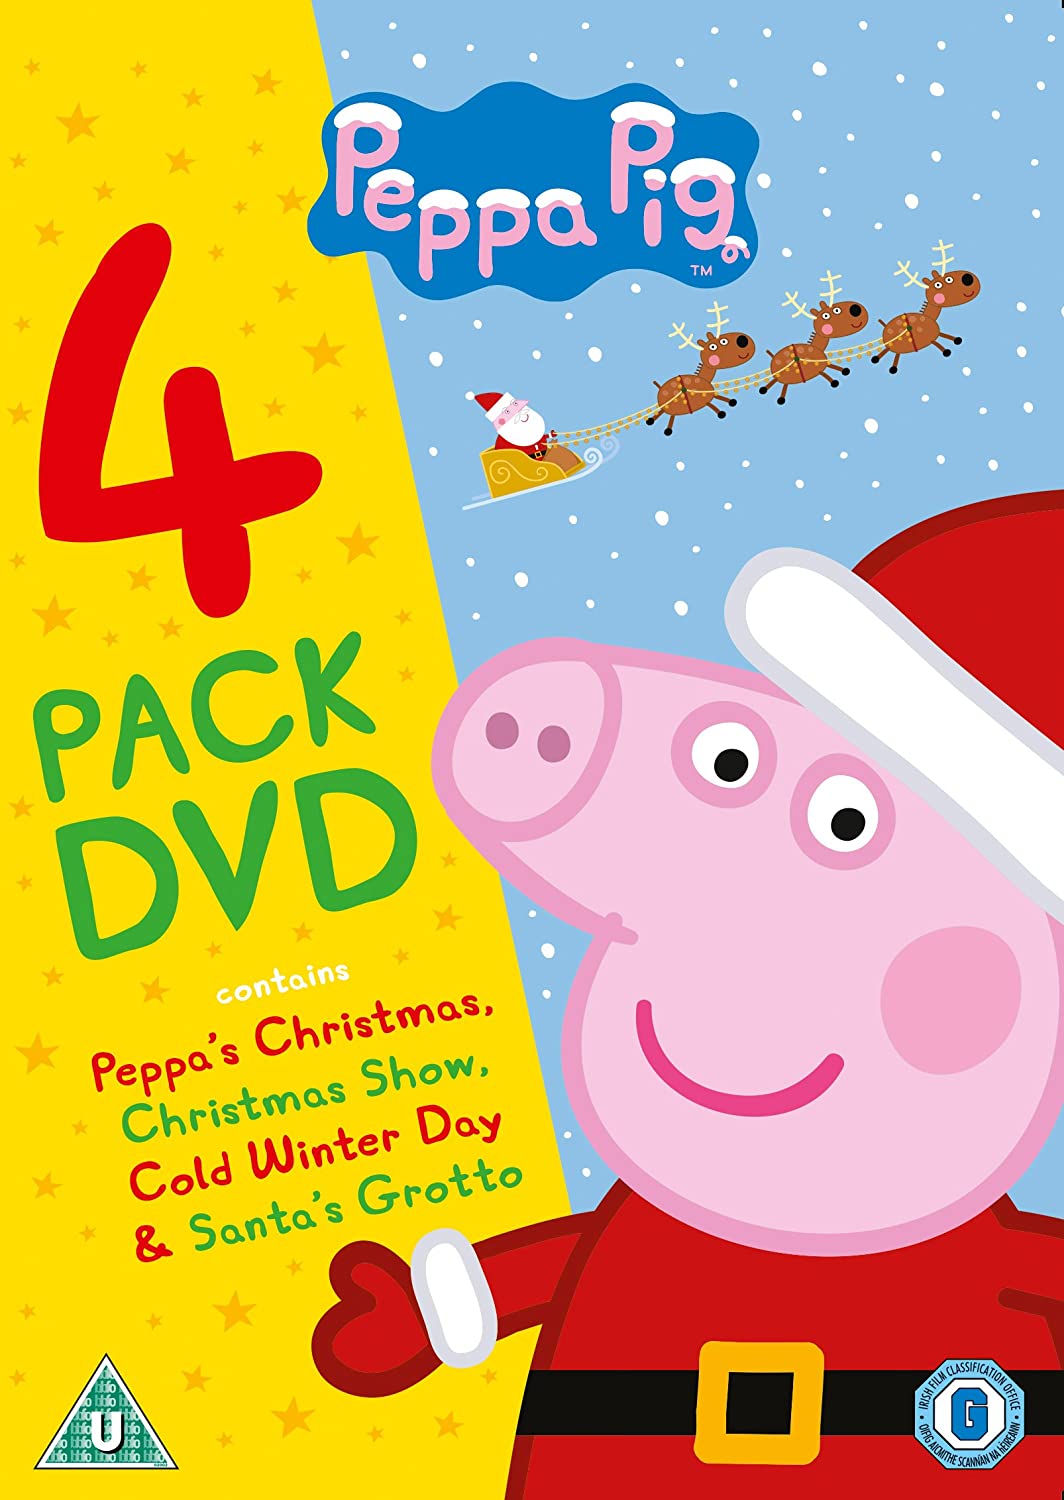 Peppa Pig: The Christmas Collection (4 Pack) (DVD)